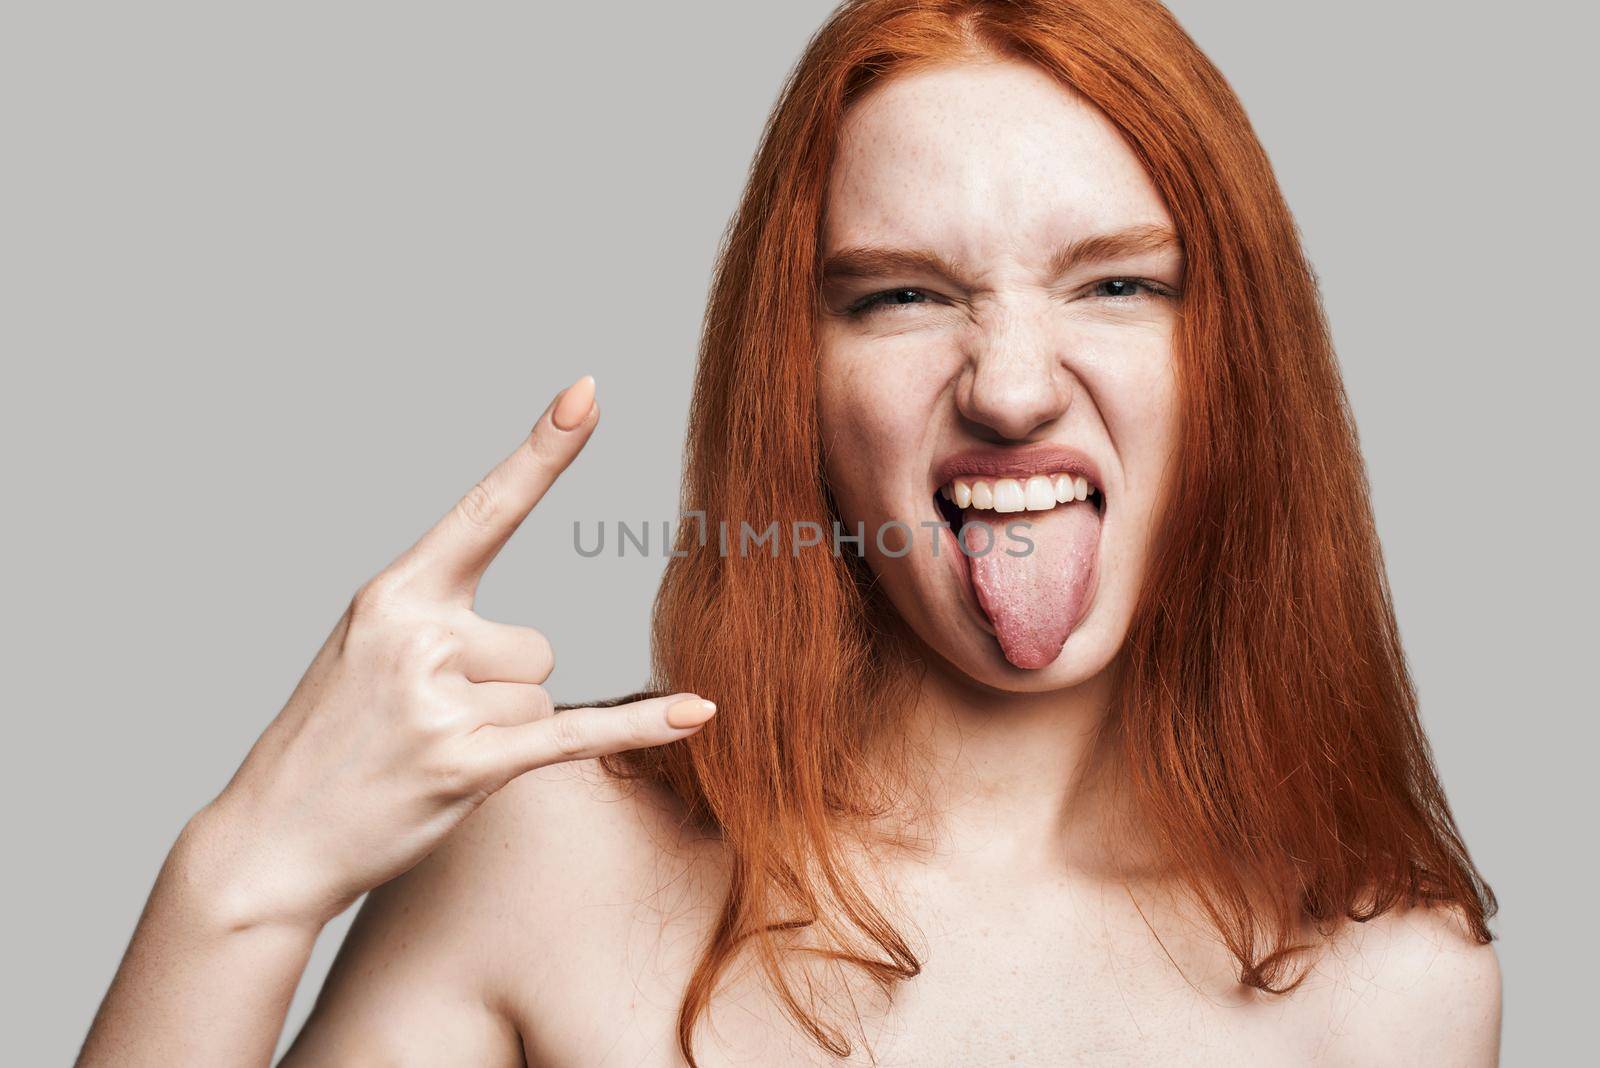 Feeling free. Close up portrait of young and cute teenage girl with long red hair showing hand sign and sticking out tongue while standing against grey background by friendsstock